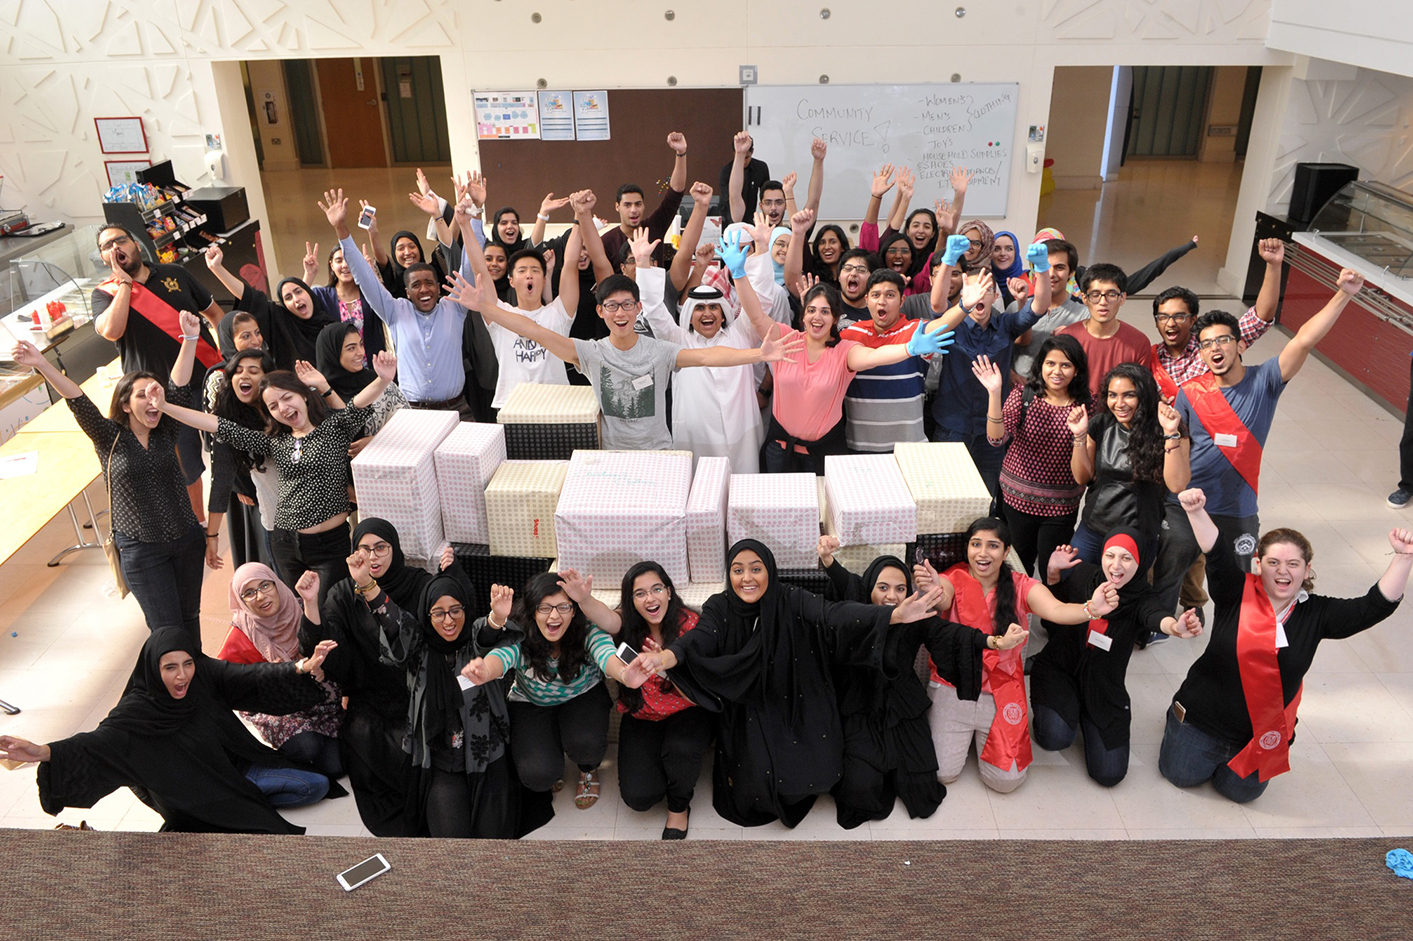 Weill Cornell Medical College in Qatar's new class entering the six-year integrated medical program. Photo credit: John Samples